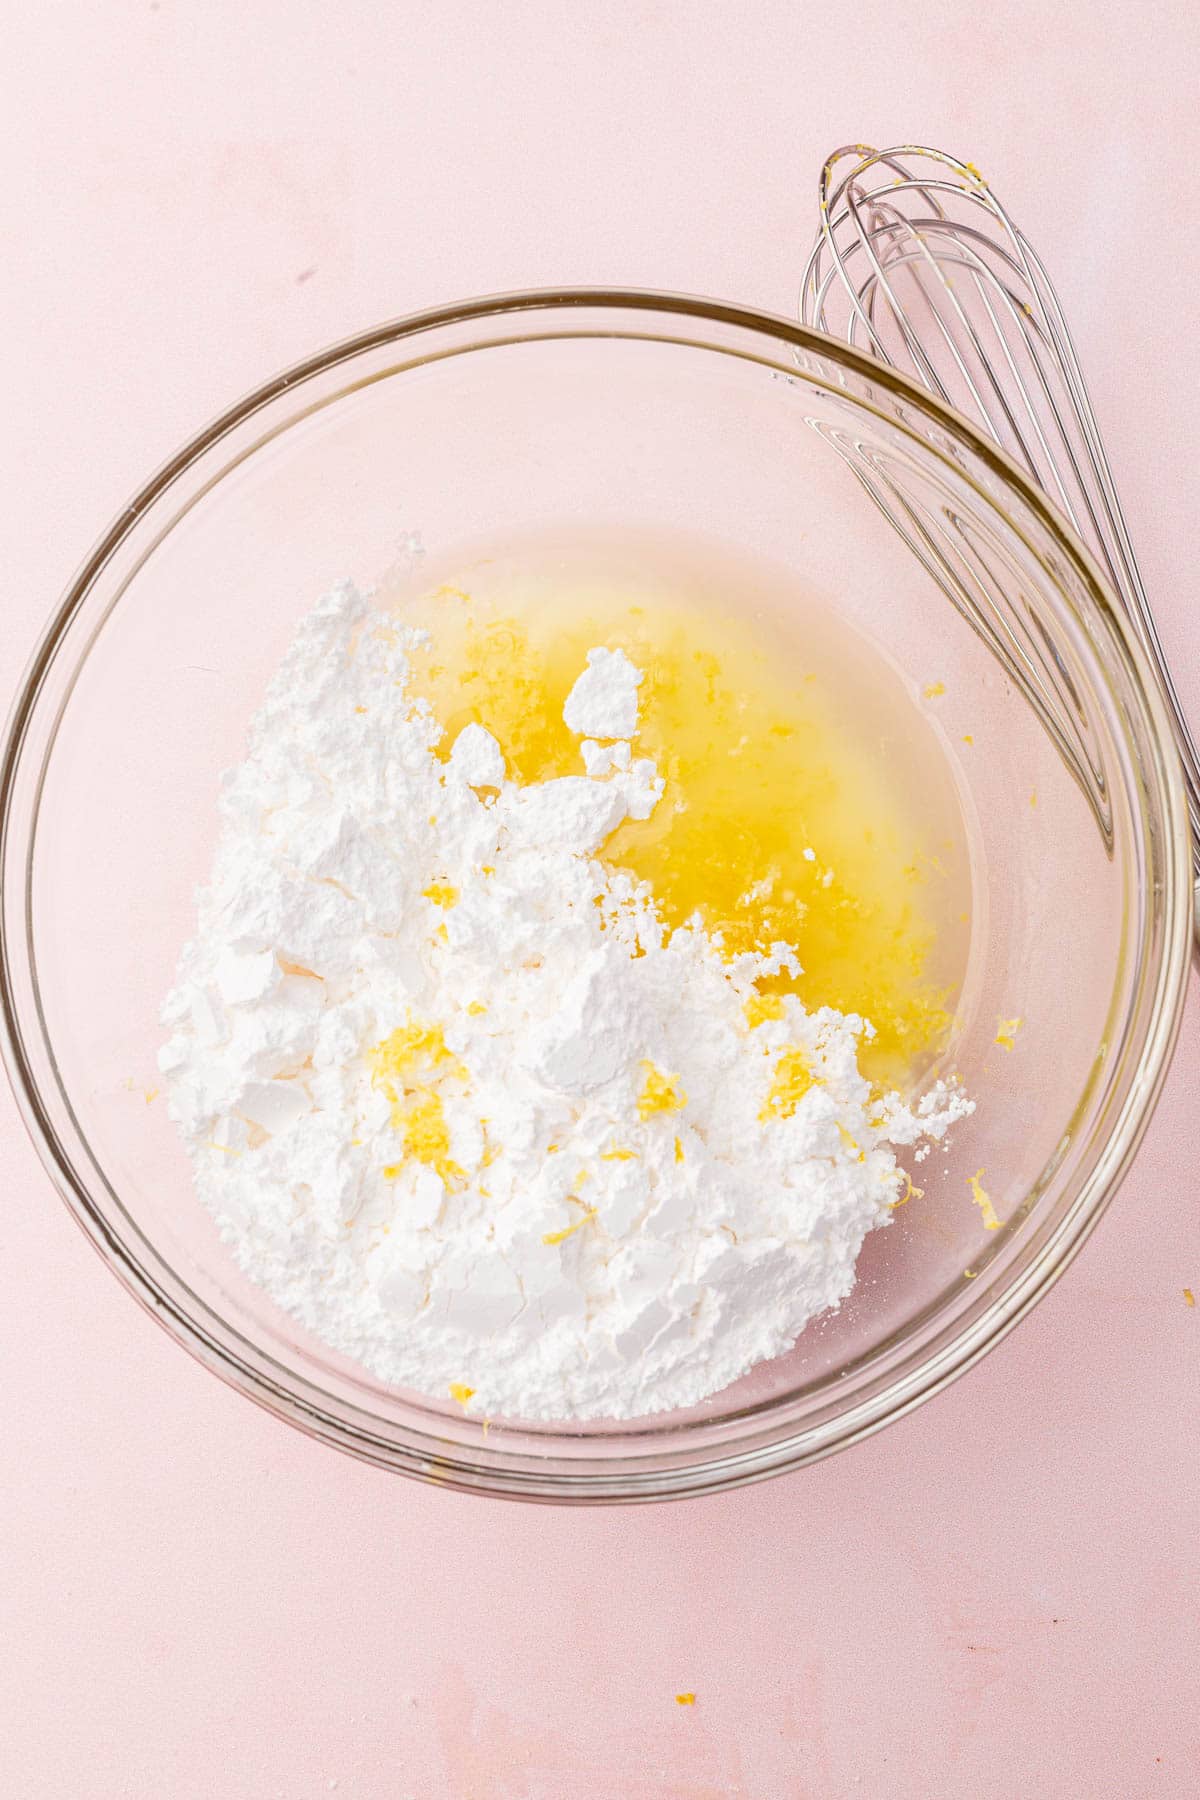 A glass mixing bowl with powdered sugar, lemon juice and lemon zest before mixing together.